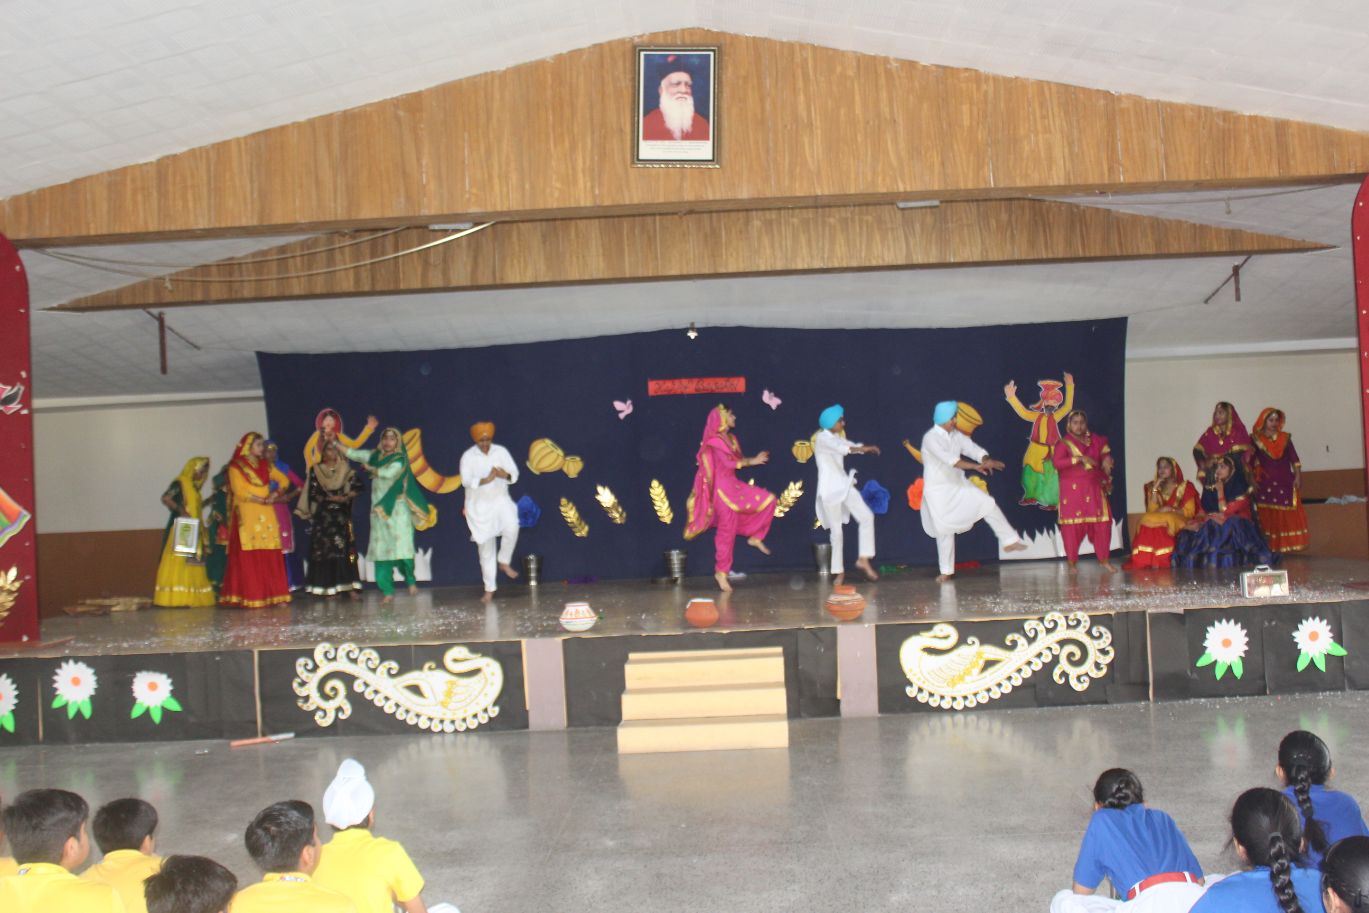 Inter House Group Dance Competition (Bhangra/Giddha)